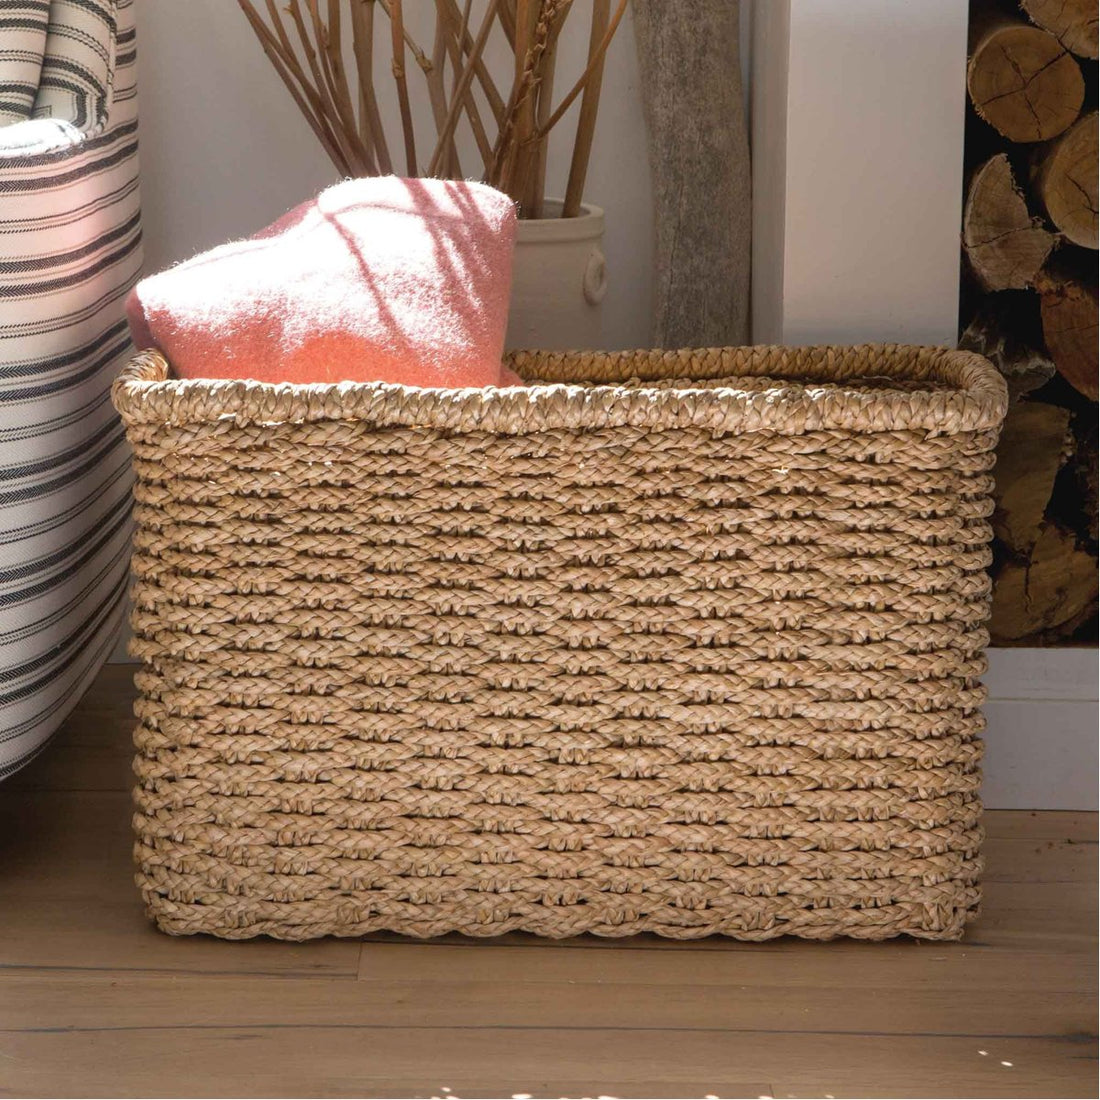 Pack Basket – Townsends